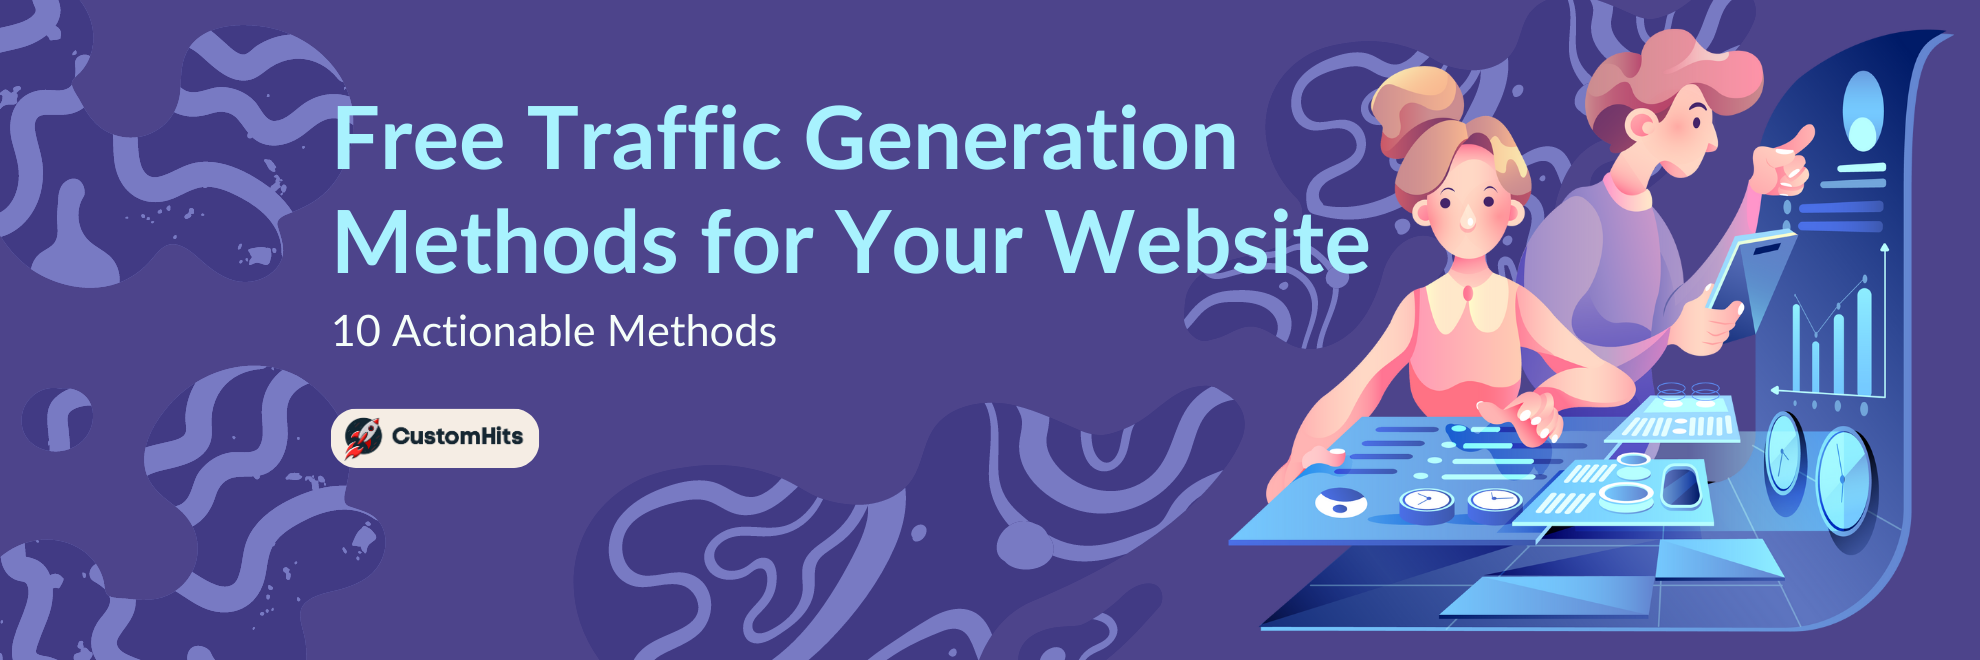 10 Actionable Top Free Traffic Generation Methods for Your Website